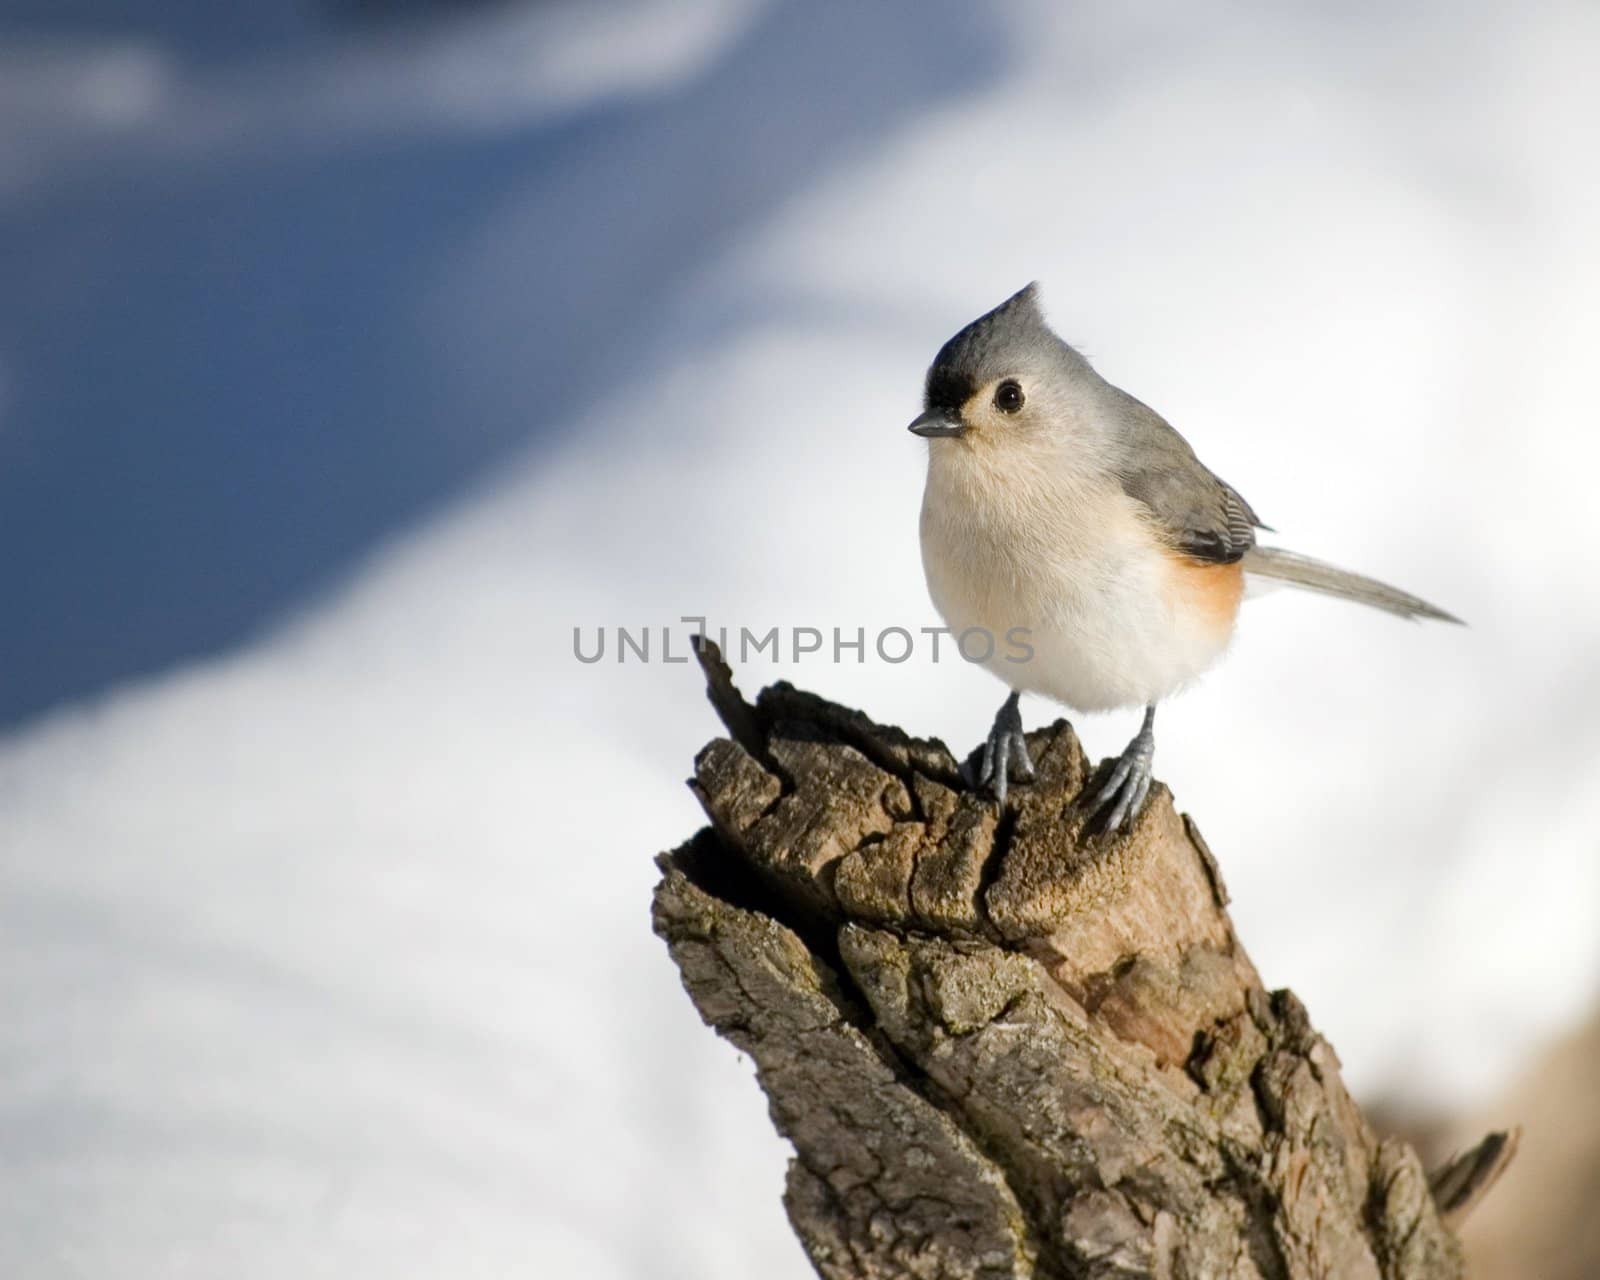 A tufted titmouse perched on a tree stump in the winter.